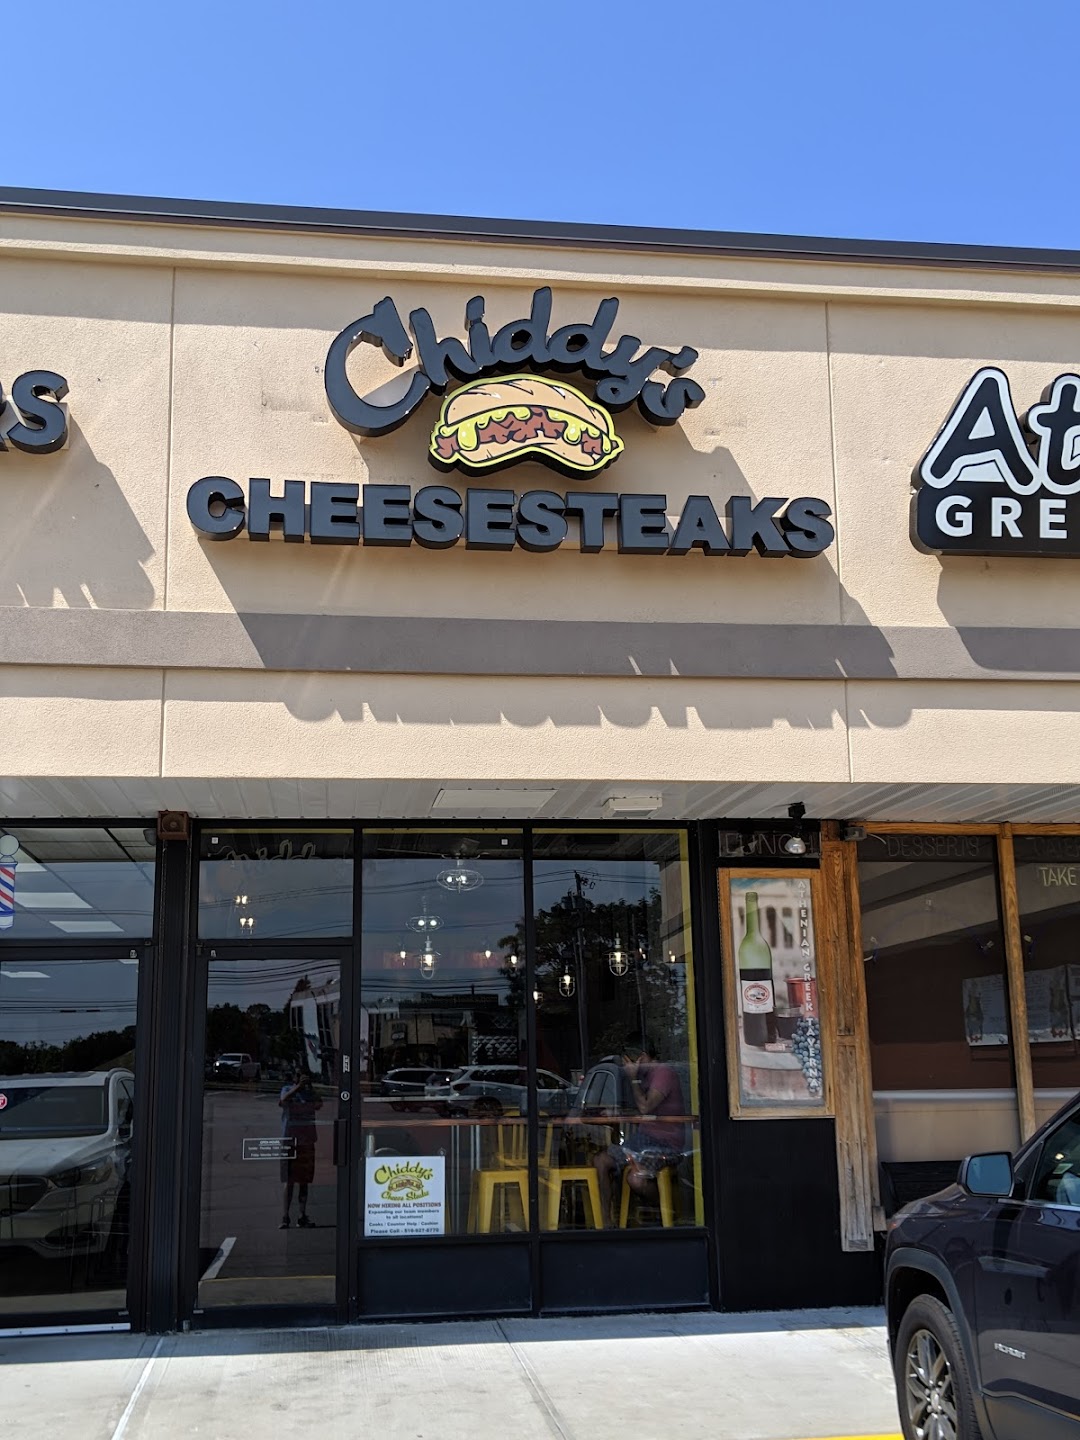 Chiddys Cheesteaks and more